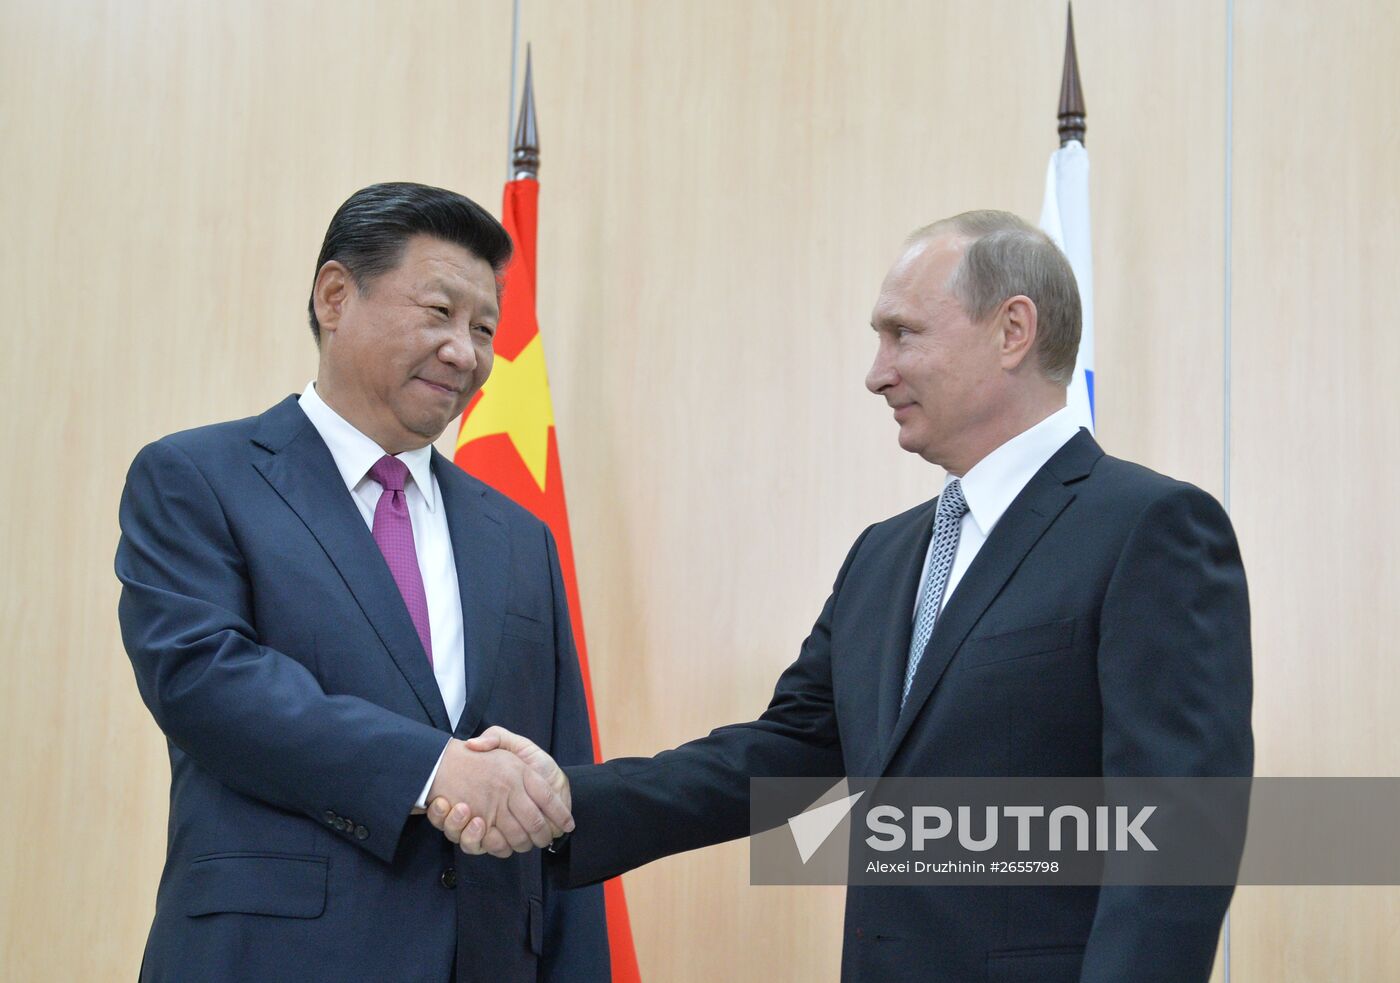 President of Russia Vladimir Putin meets with President of China Xi Jinping